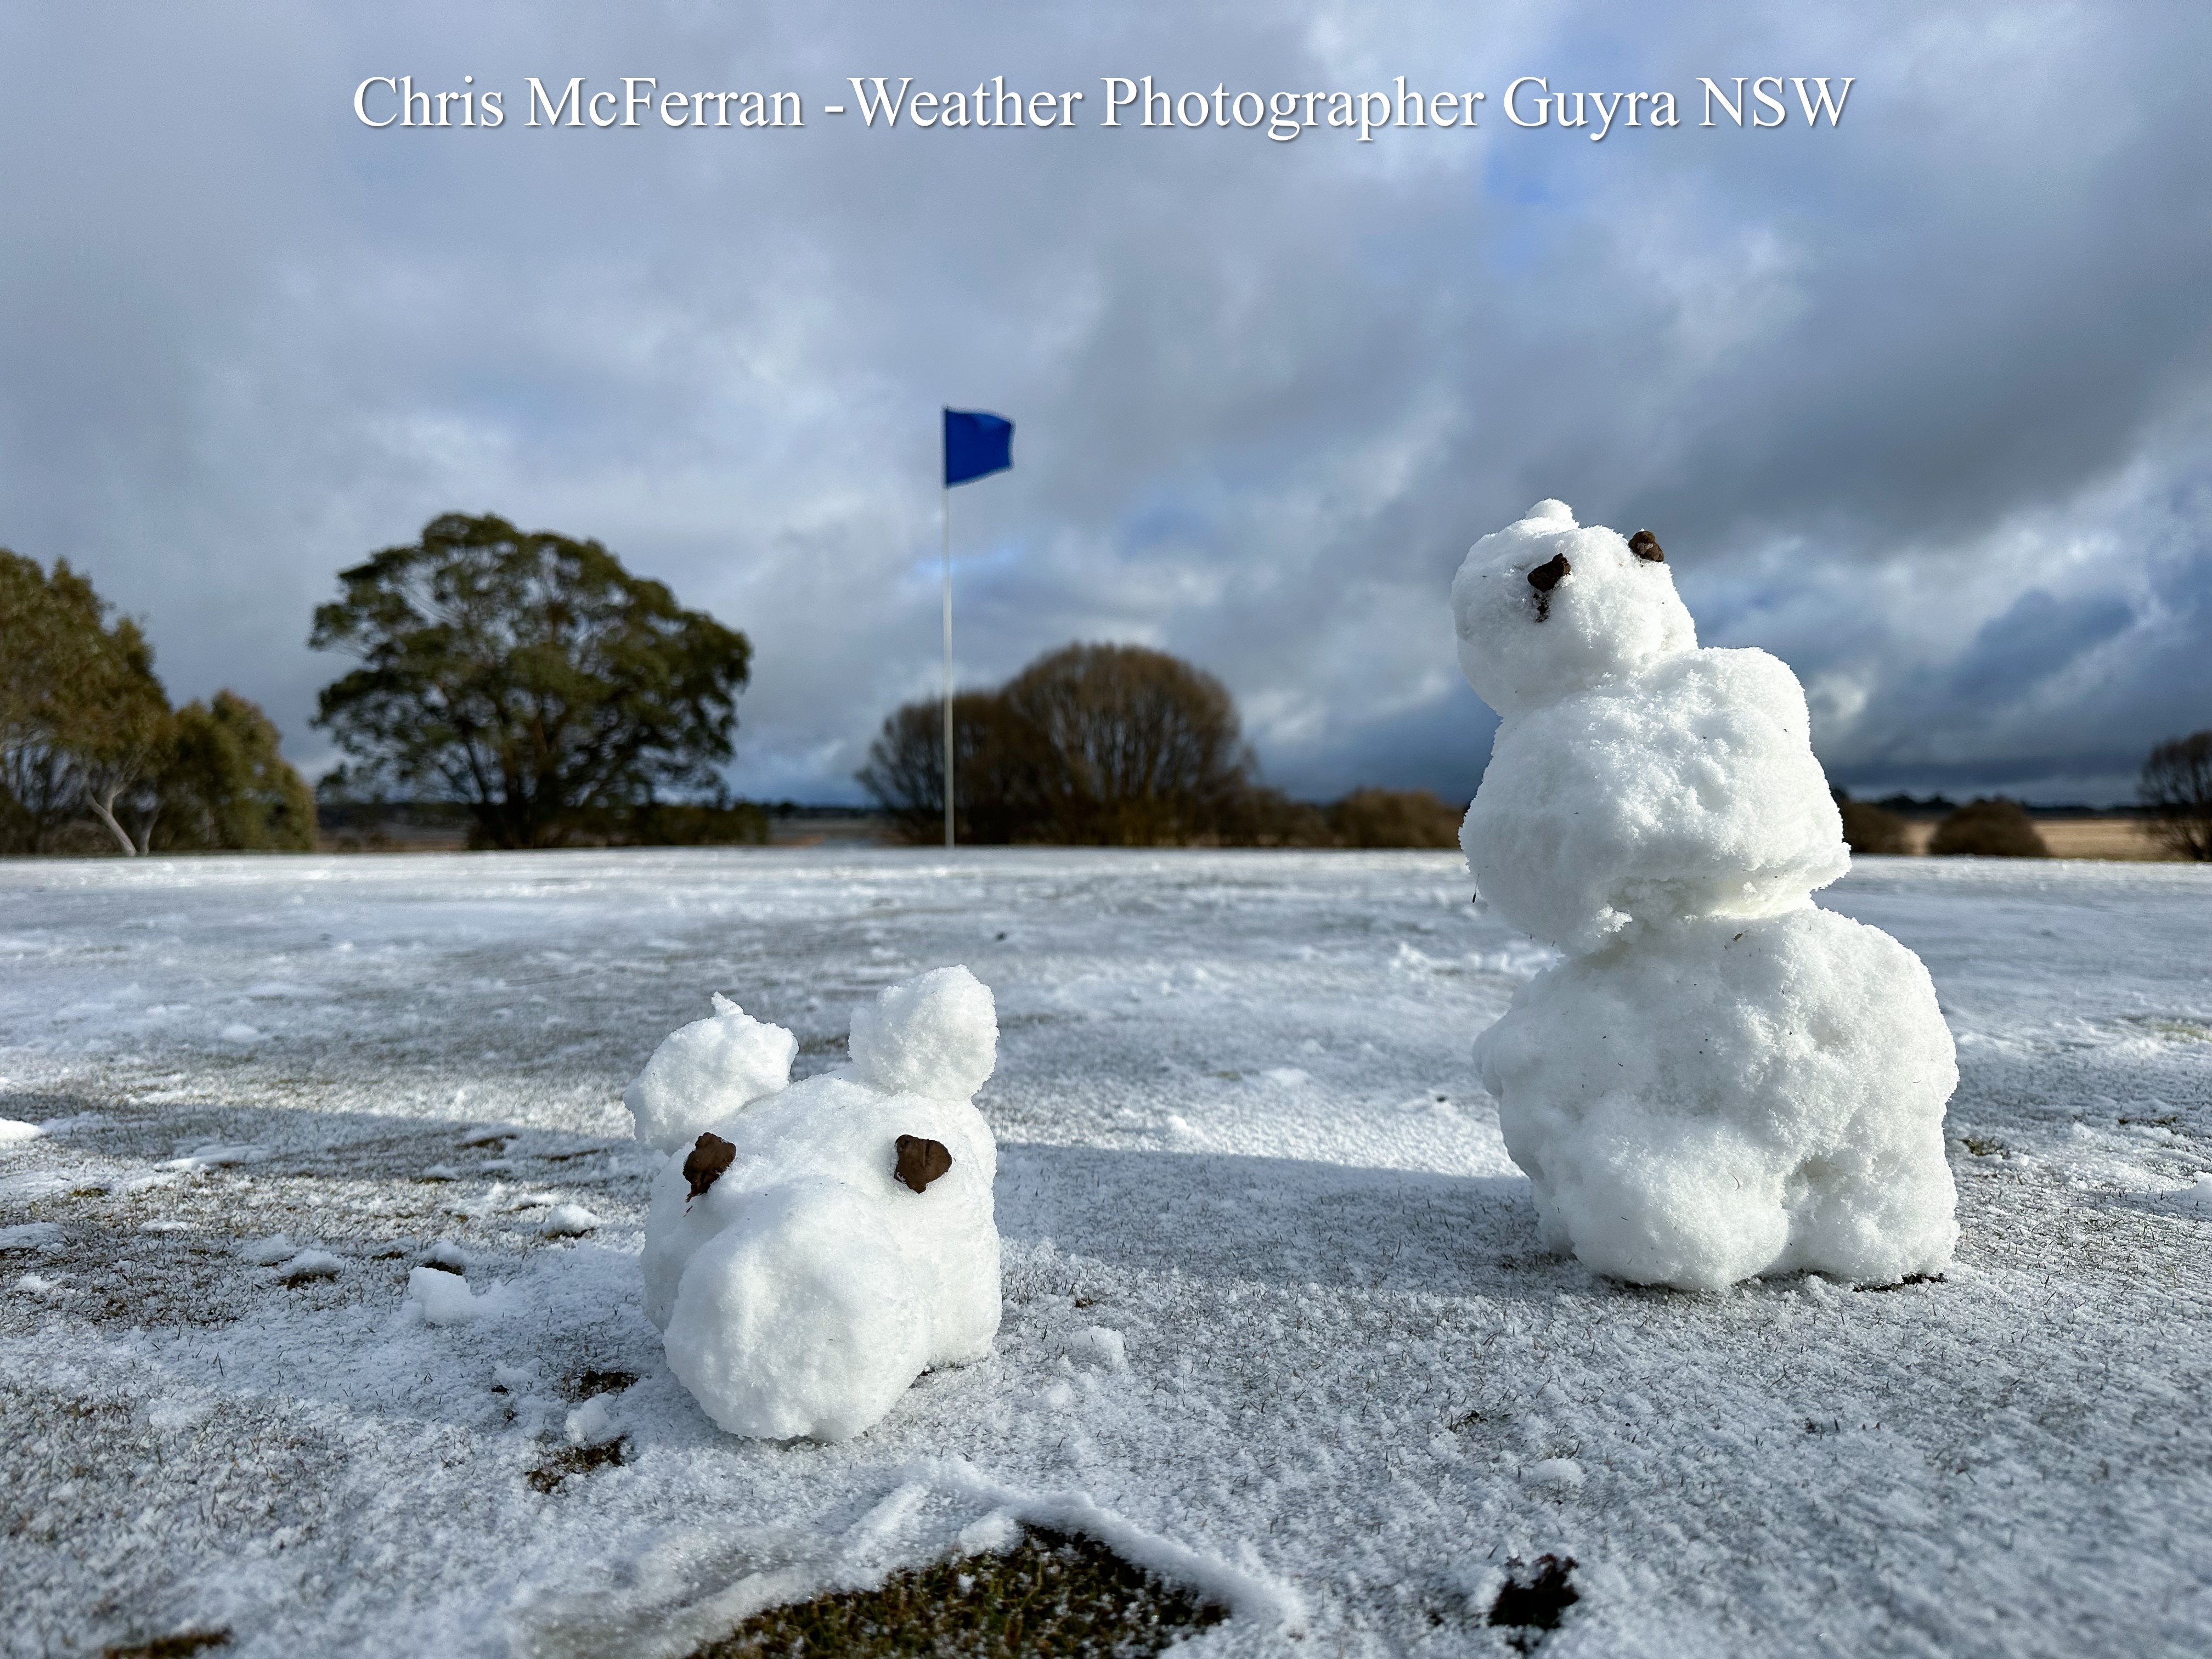 Two small snowmen made from sleet on a car park ground in Guyra New Suoth Wales 